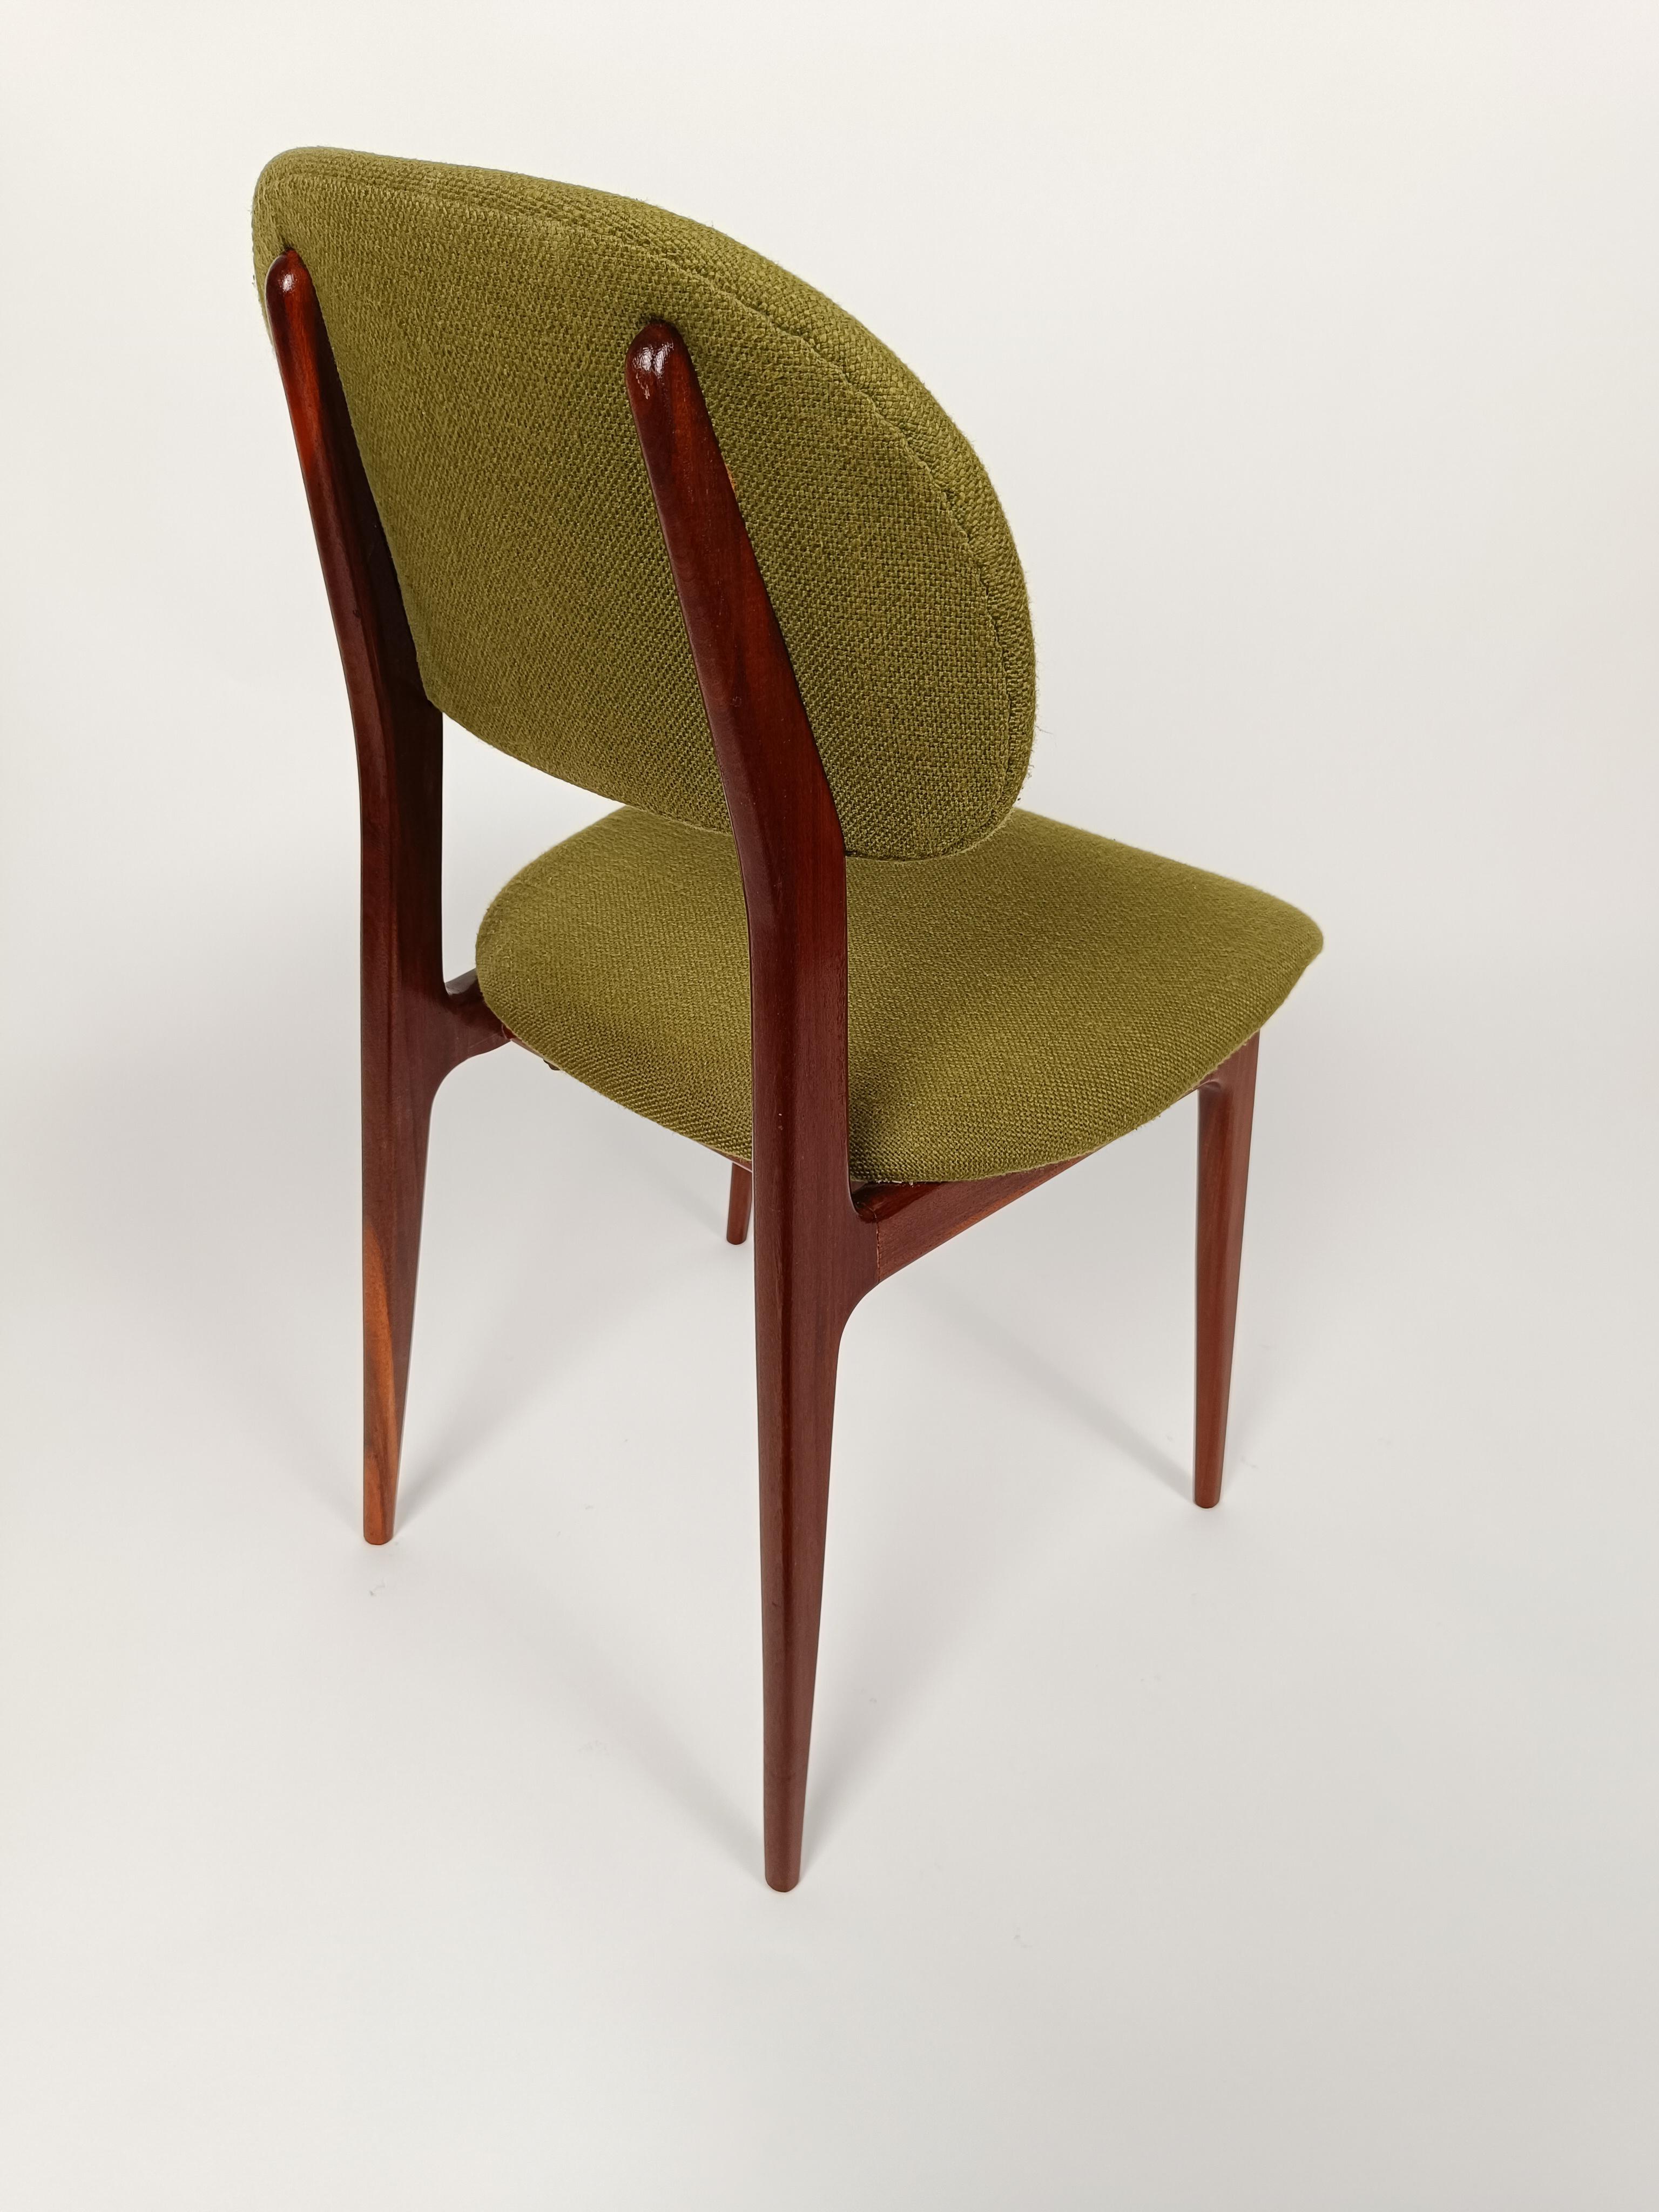 Italian Midcentury Chairs Attributed to Carlo Hauner and Martin Eisler, 1960s For Sale 6